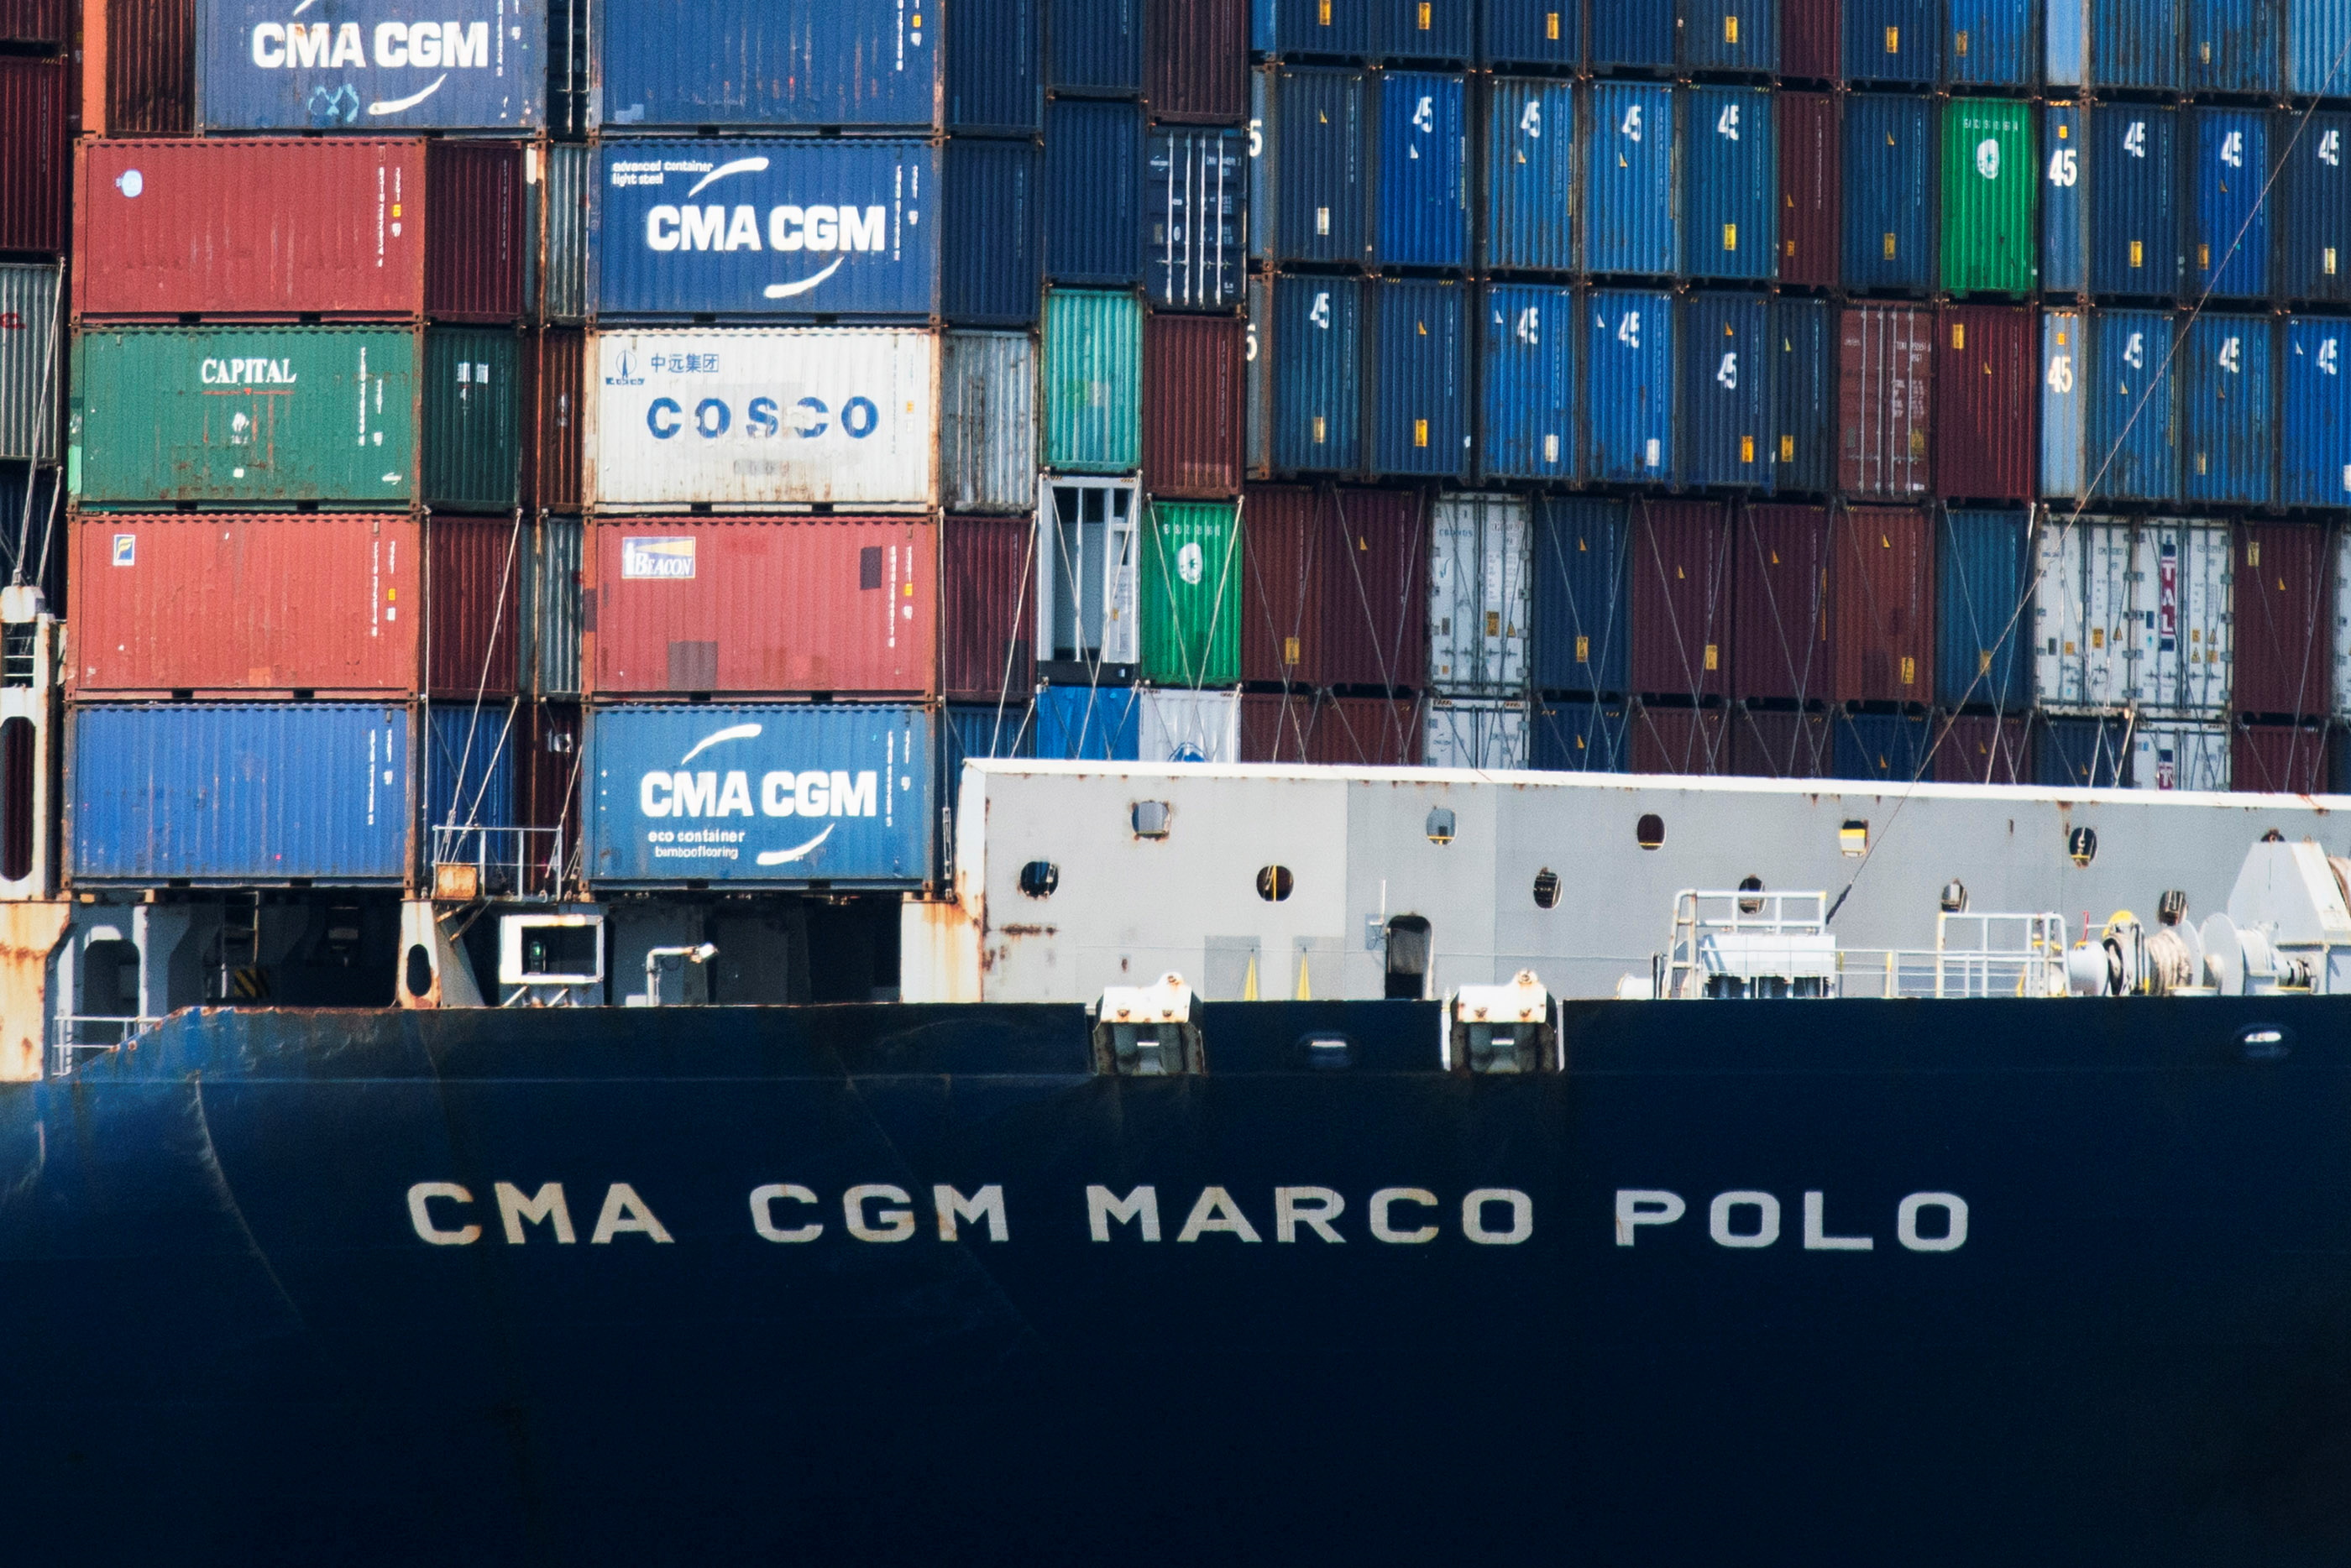 The CMA CGM Marco Polo, an Explorer class container ship docks at Elizabeth port as seen from Bayonne, New Jersey, U.S., May 20, 2021.  REUTERS/Eduardo Munoz